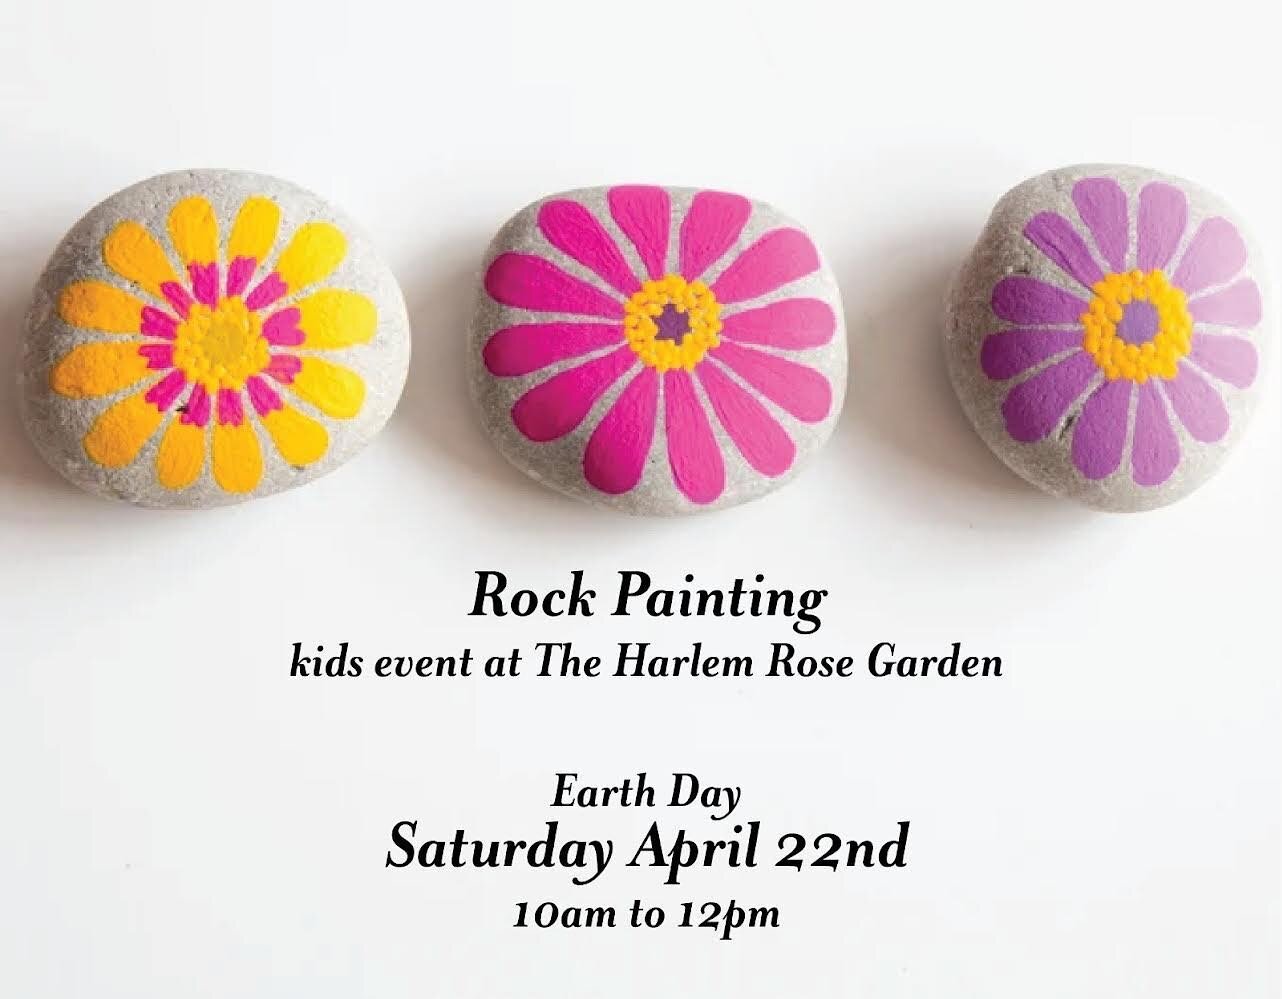 Please join us this Saturday 4/22 (Earth Day 🌎) with your little ones for rock painting! All supplies will be provided. We hope to see you there!